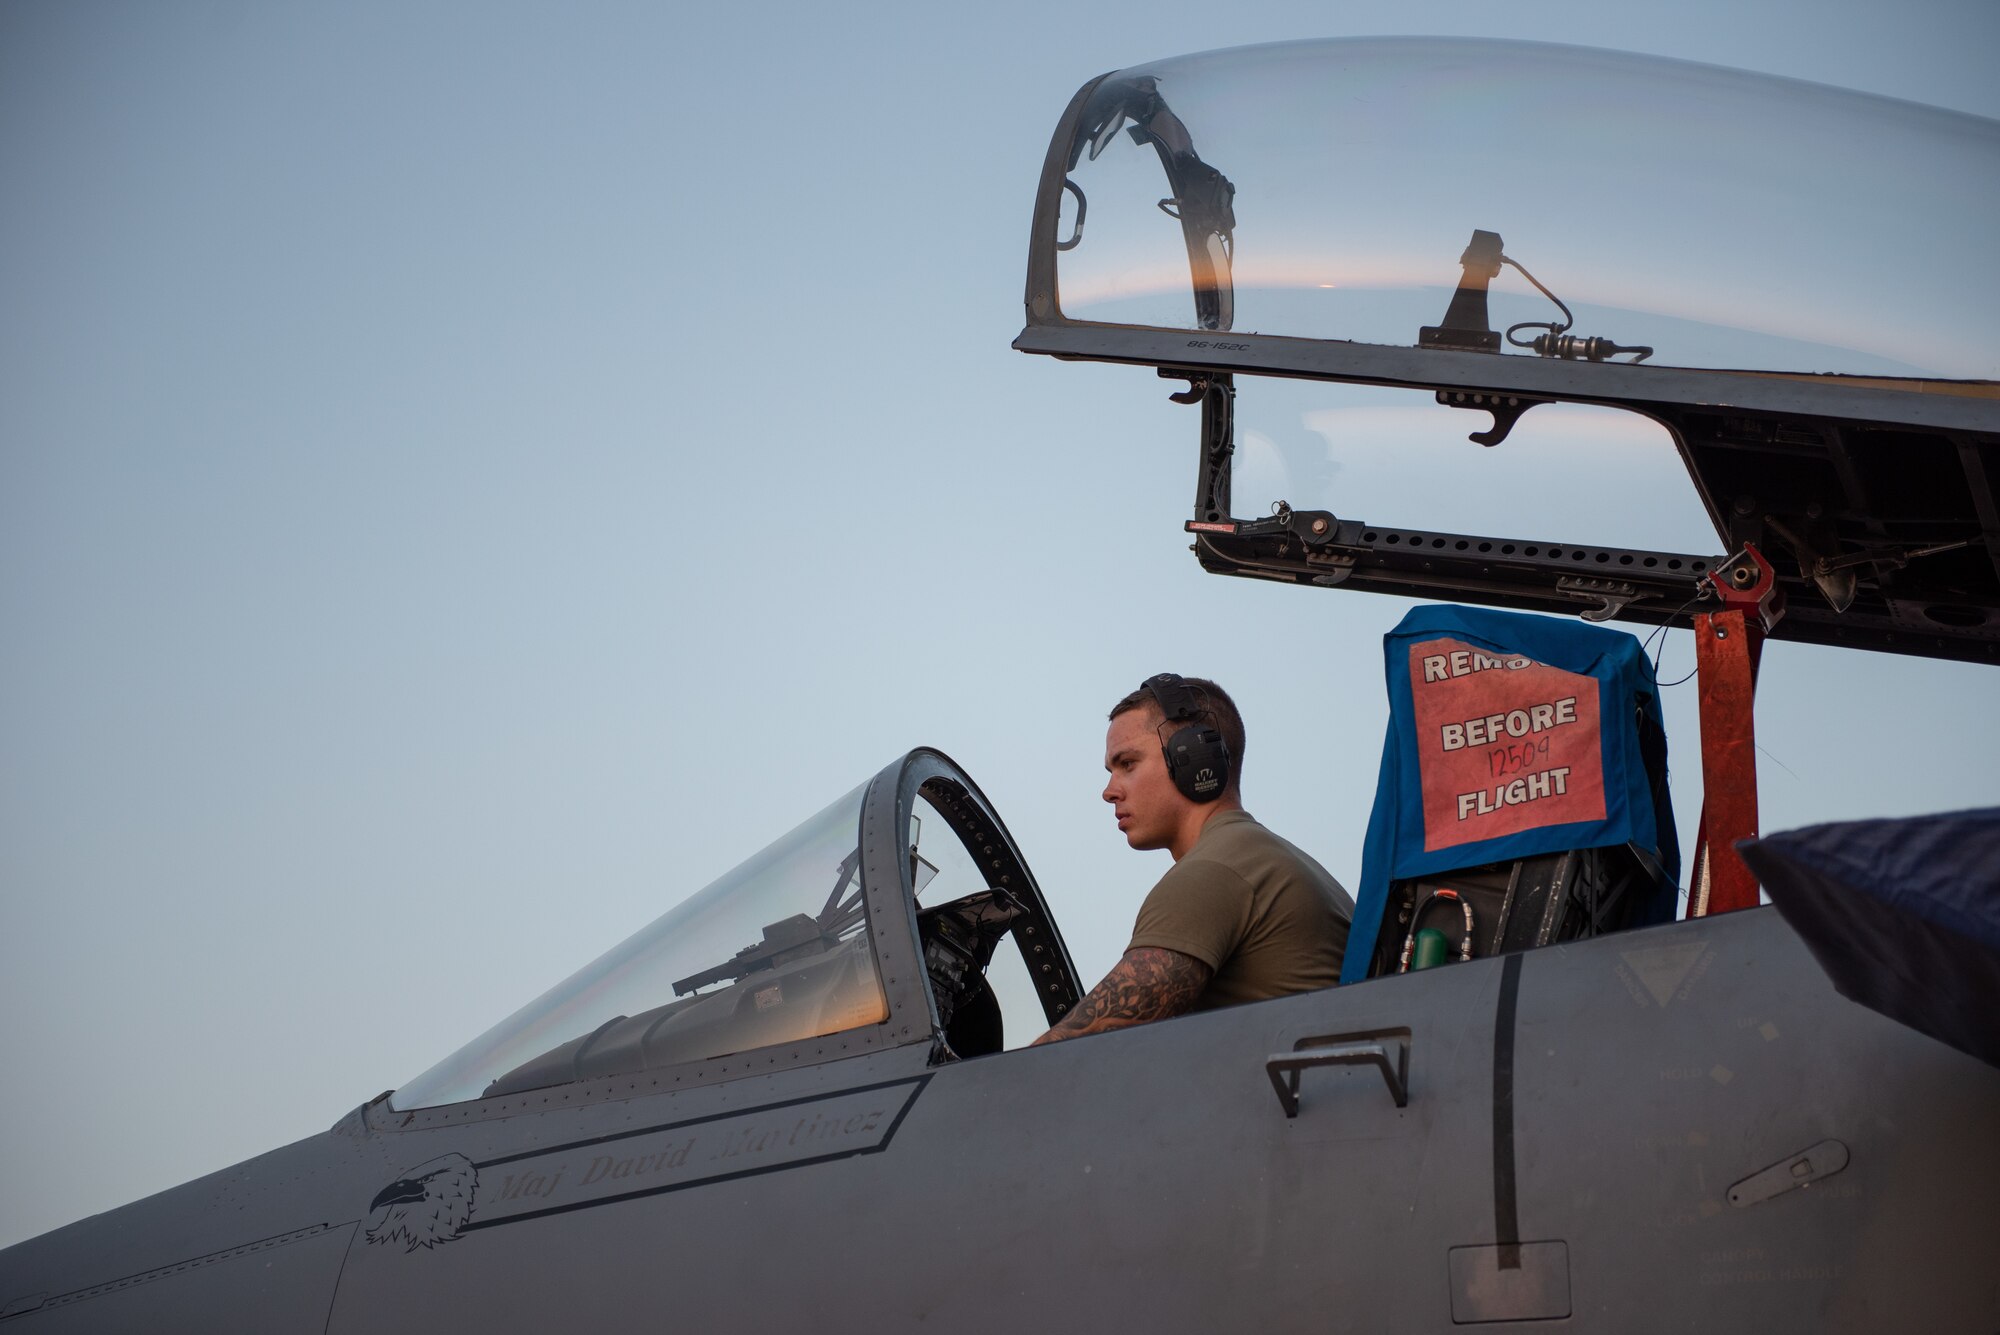 Staff Sgt. Bryce Paulson, 380th Expeditionary Aircraft Maintenance Squadron crew chief, inspects an F-15C Eagle during exercise Hype Eagle Aug. 18, 2019, at Prince Sultan Air Base, Saudi Arabia. The 159th Expeditionary Fighter Squadron forward deployed to challenge their flexibility at expanding tactical and strategical reach while strengthening coalition and regional partnerships in the U.S. Central Command area of responsibility. (U.S. Air Force photo by Staff Sgt. Chris Thornbury)